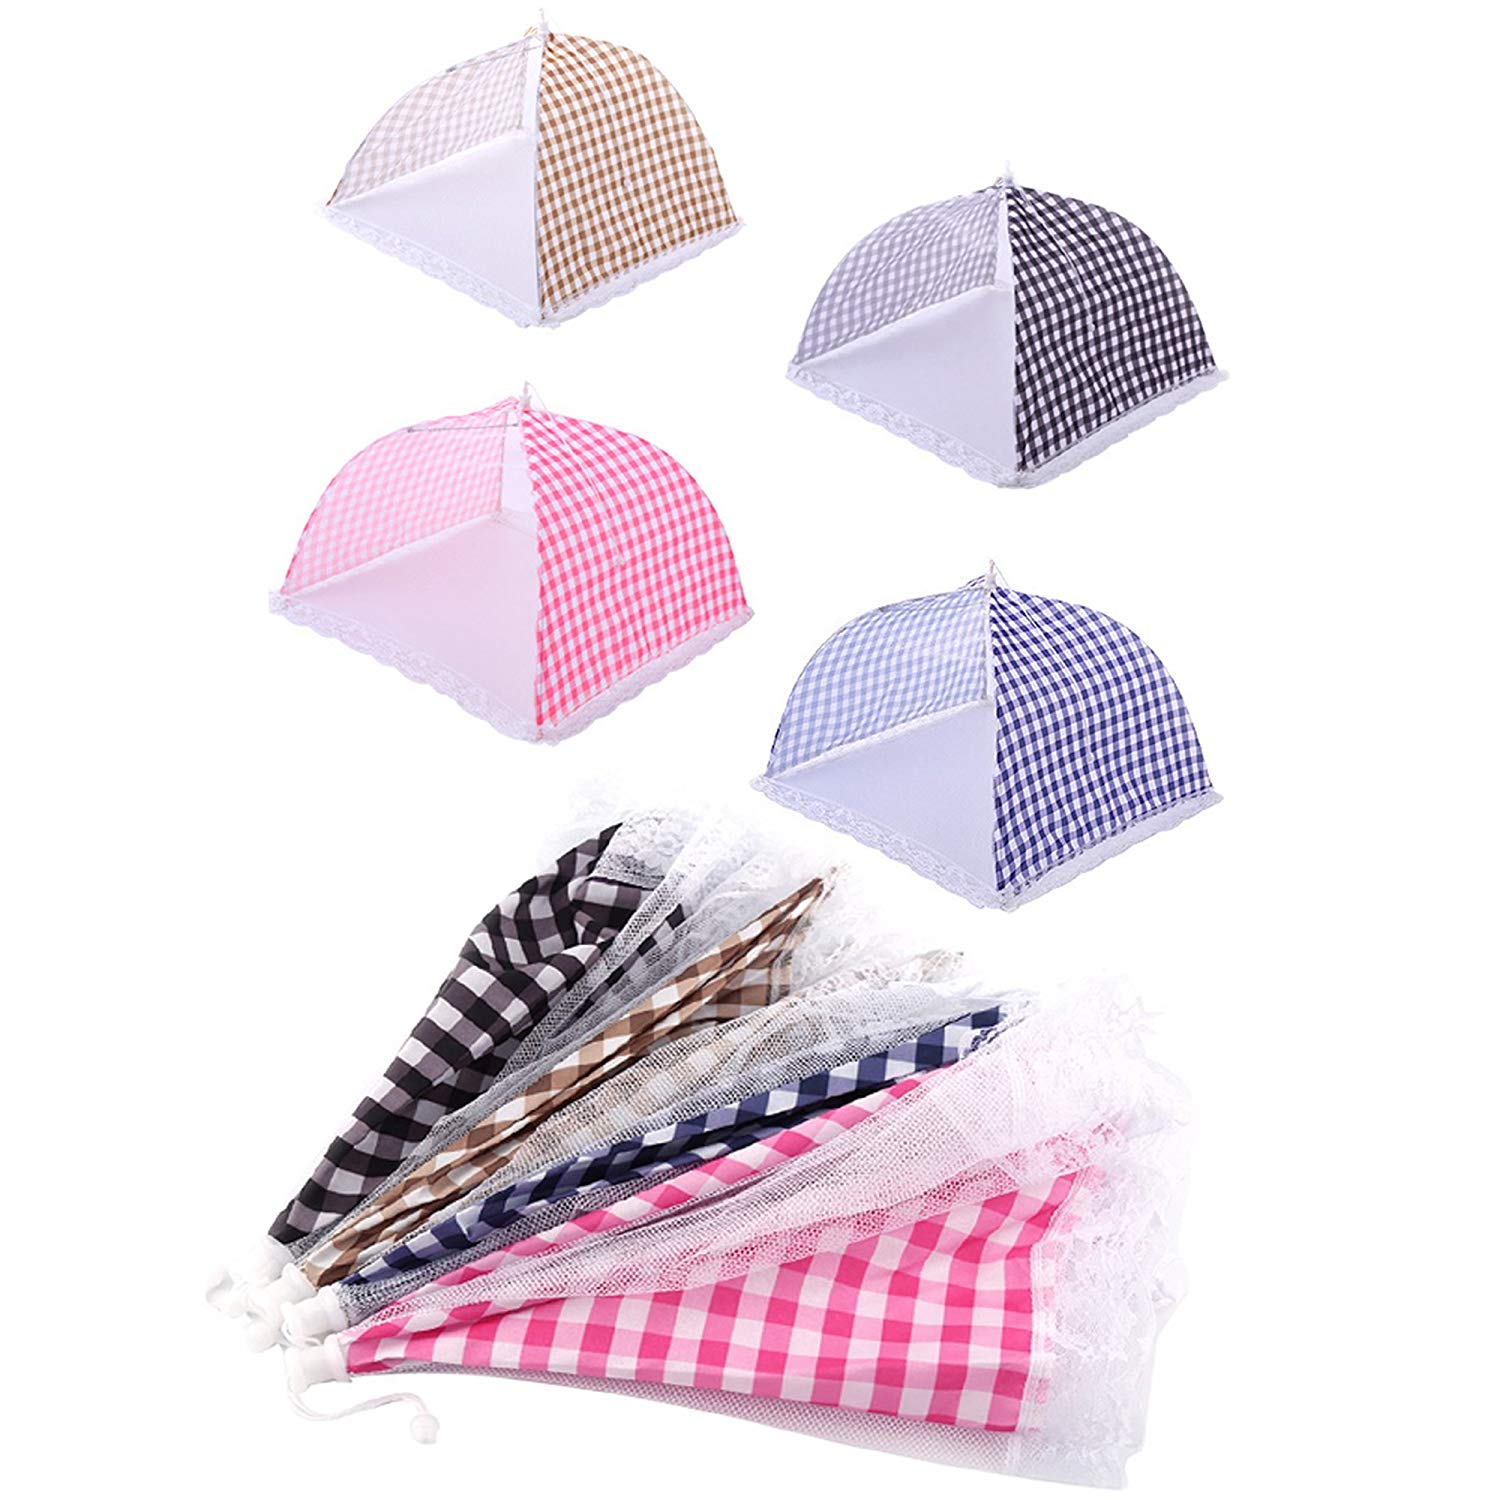 4 Pack Food Tents Pop Up Mesh Screen Food Cover Tent Protector 12.6 inch - Keep Out Flies Bugs Mosquitoes Away From Your Food And Fruit - Reusable Collapsible Outdoor Picnic BBQ Net Food Umbrella